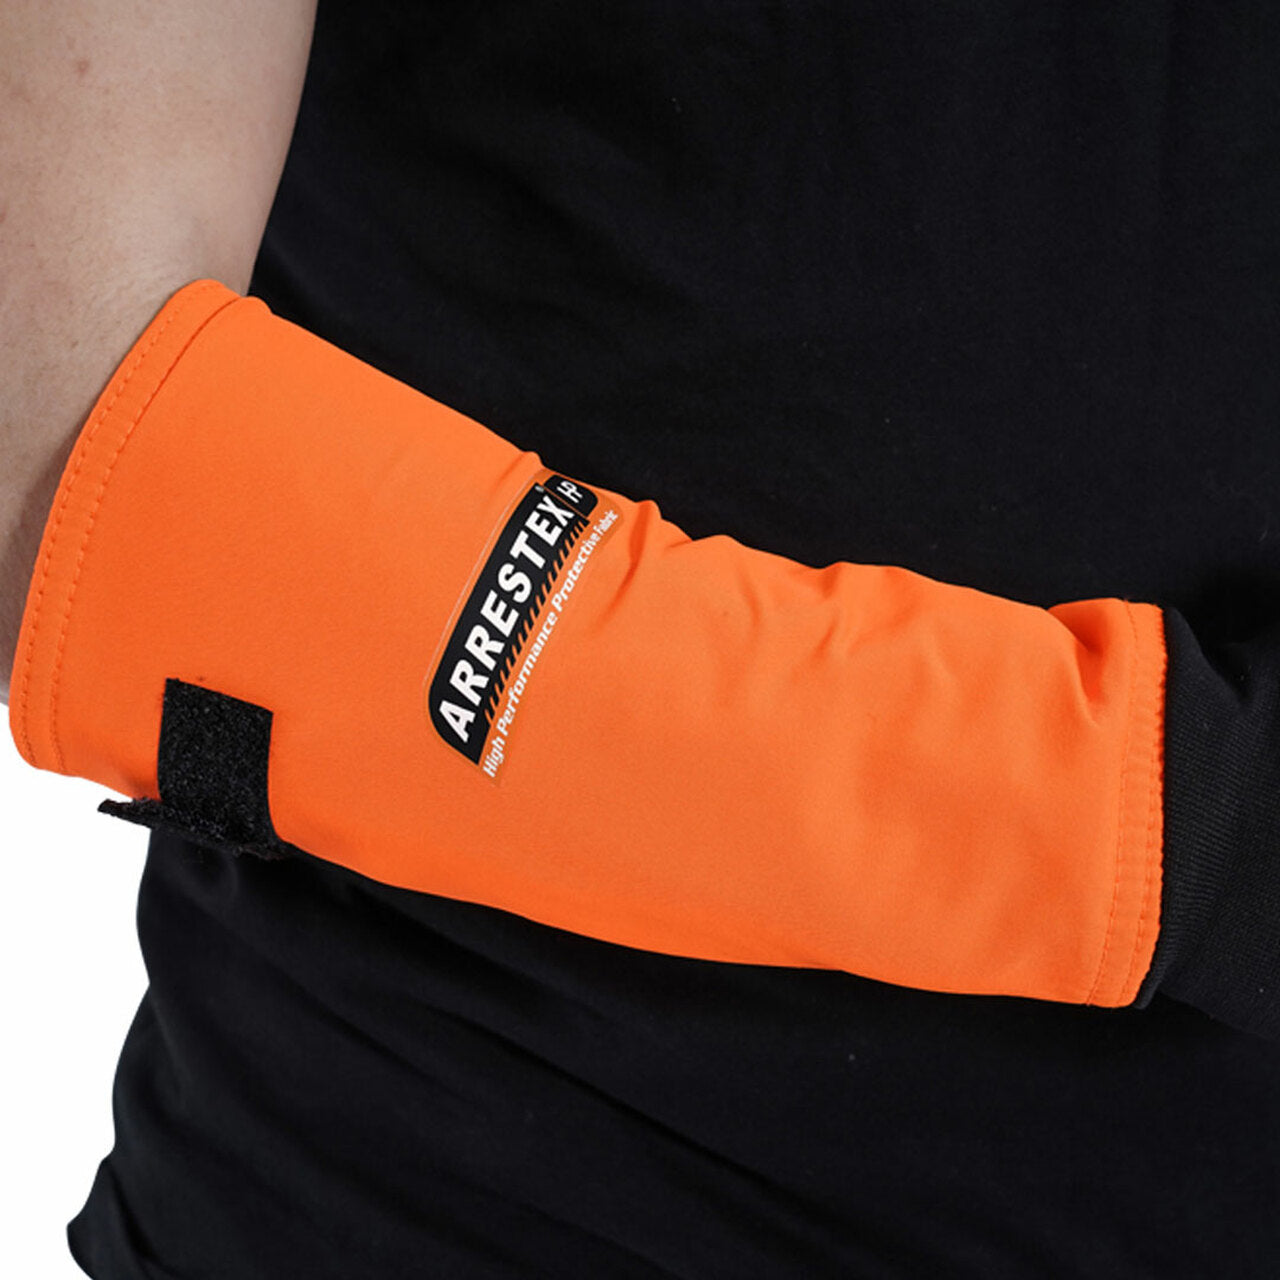 Clogger Arm Protector with Stretch Thumbhole Cuff AP51